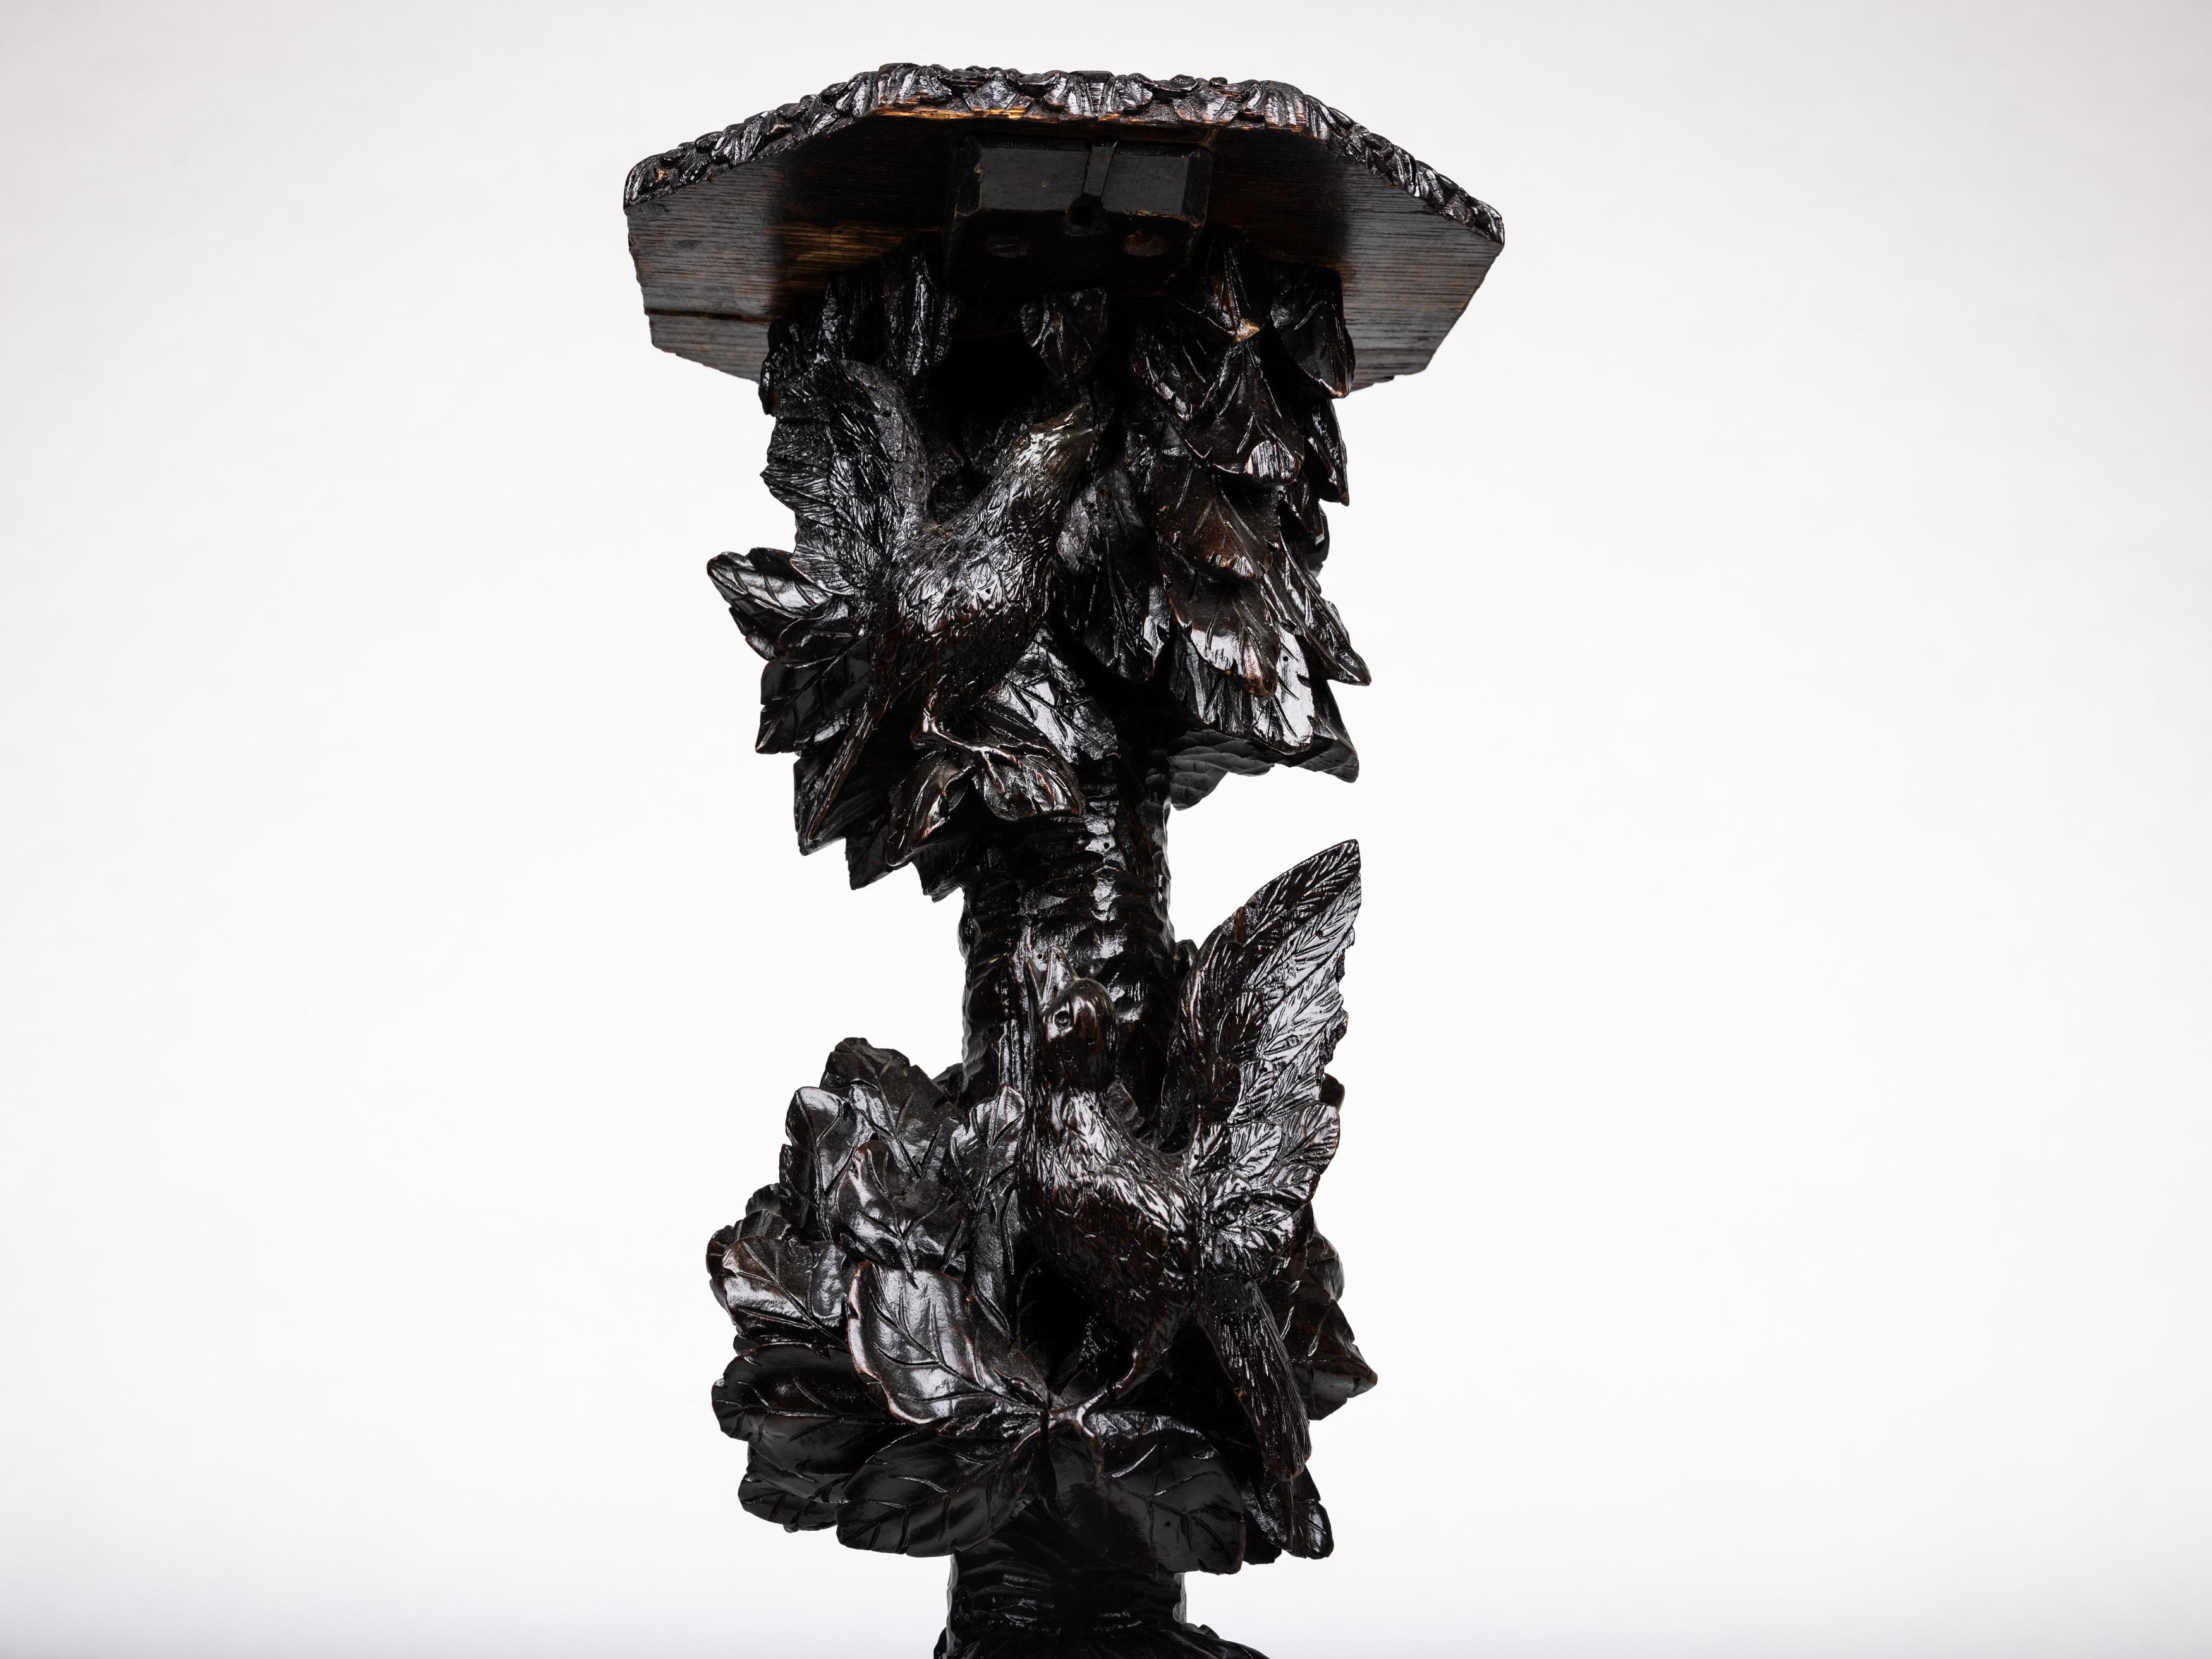 Incredibly special pedestal, made in the late 19. century, around 1880 in Austria or Bavaria, in typical Schwarzwald - Black Forest decor / Tramp Art. 

The column is made from wood that has been stained to a dark shade. The entire column is richly